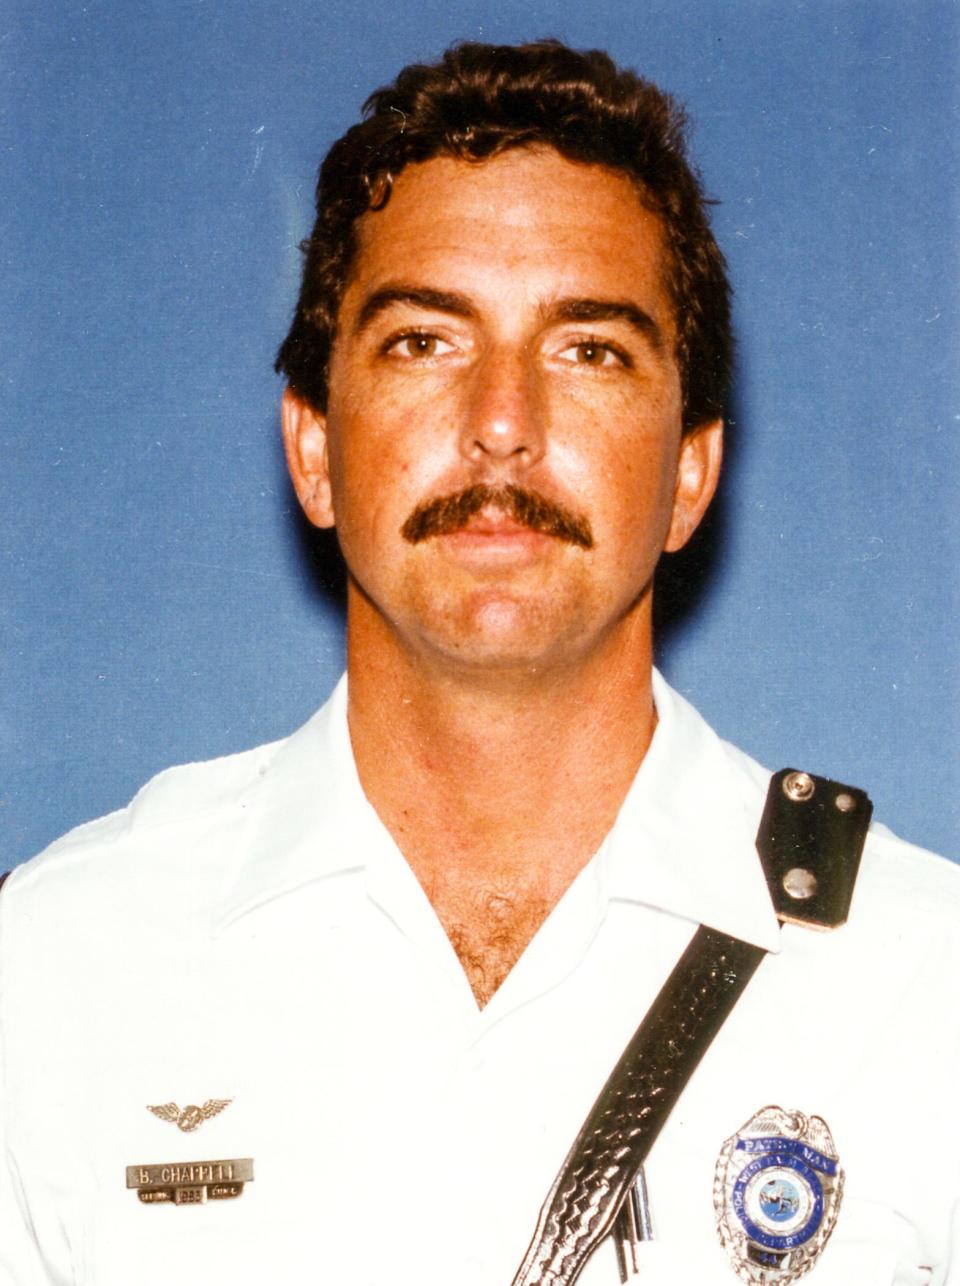 West Palm Beach motorcycle officer Brian Chappell was killed by Norberto Pietri in 1988.